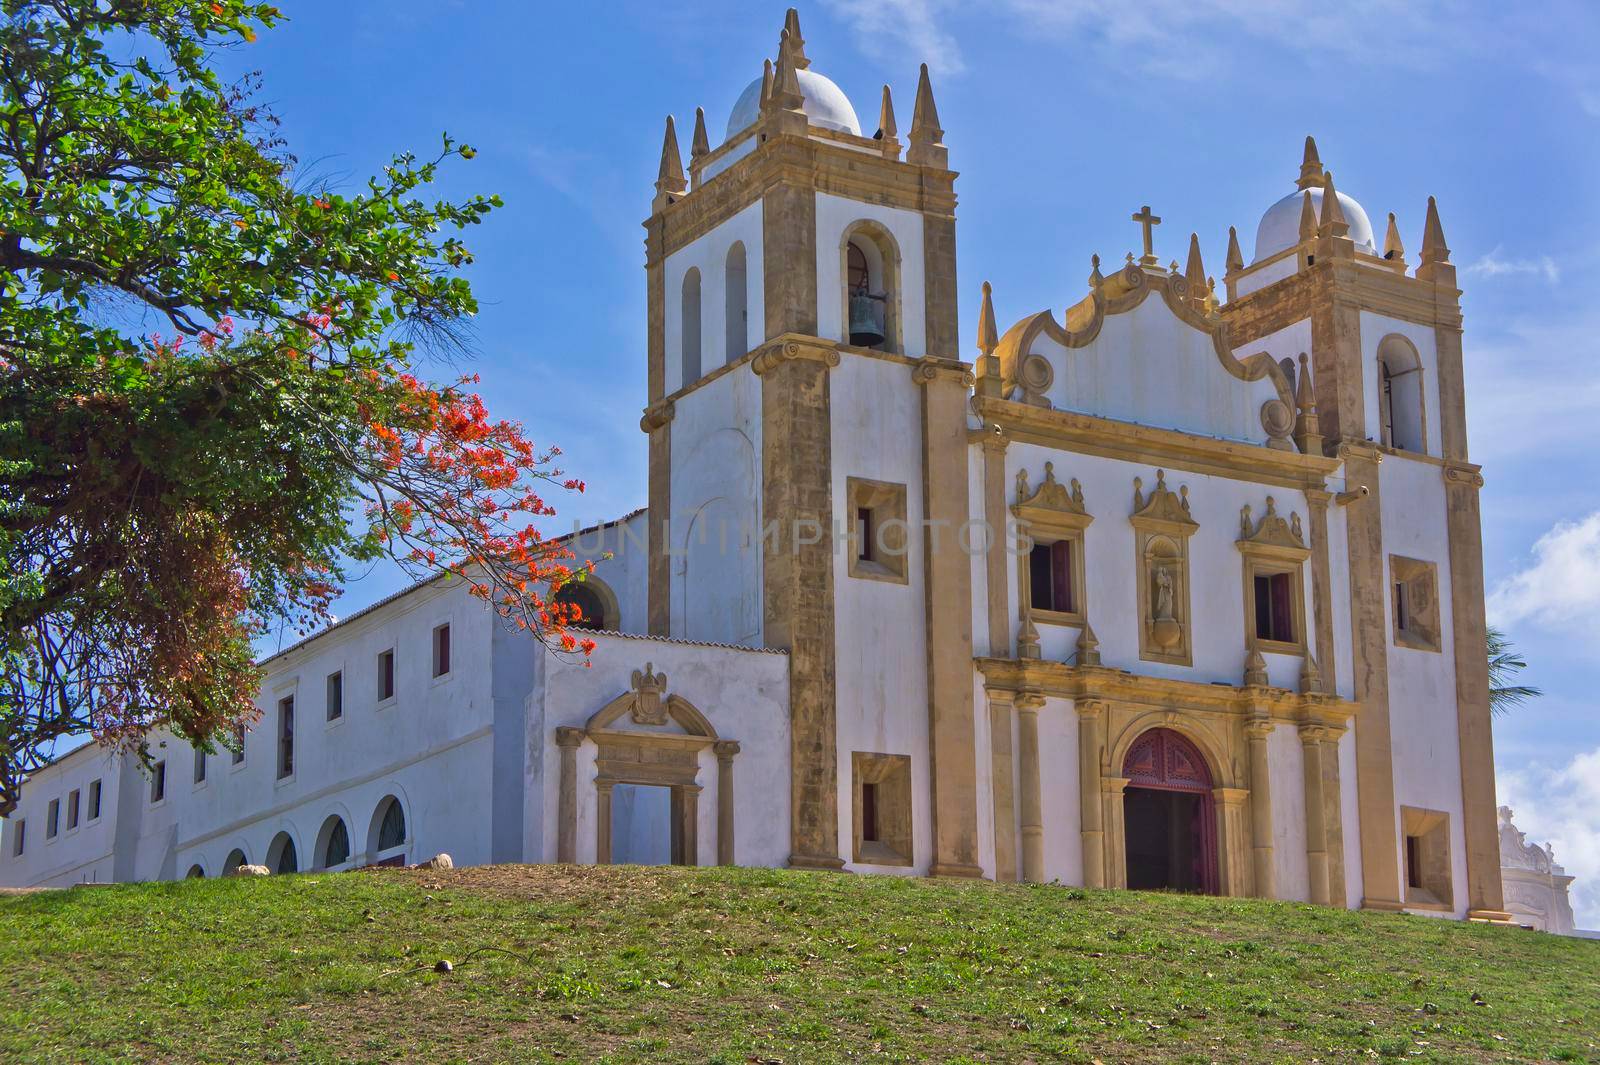 Olinda, Old city view with a Colonial church, Brazil, South America